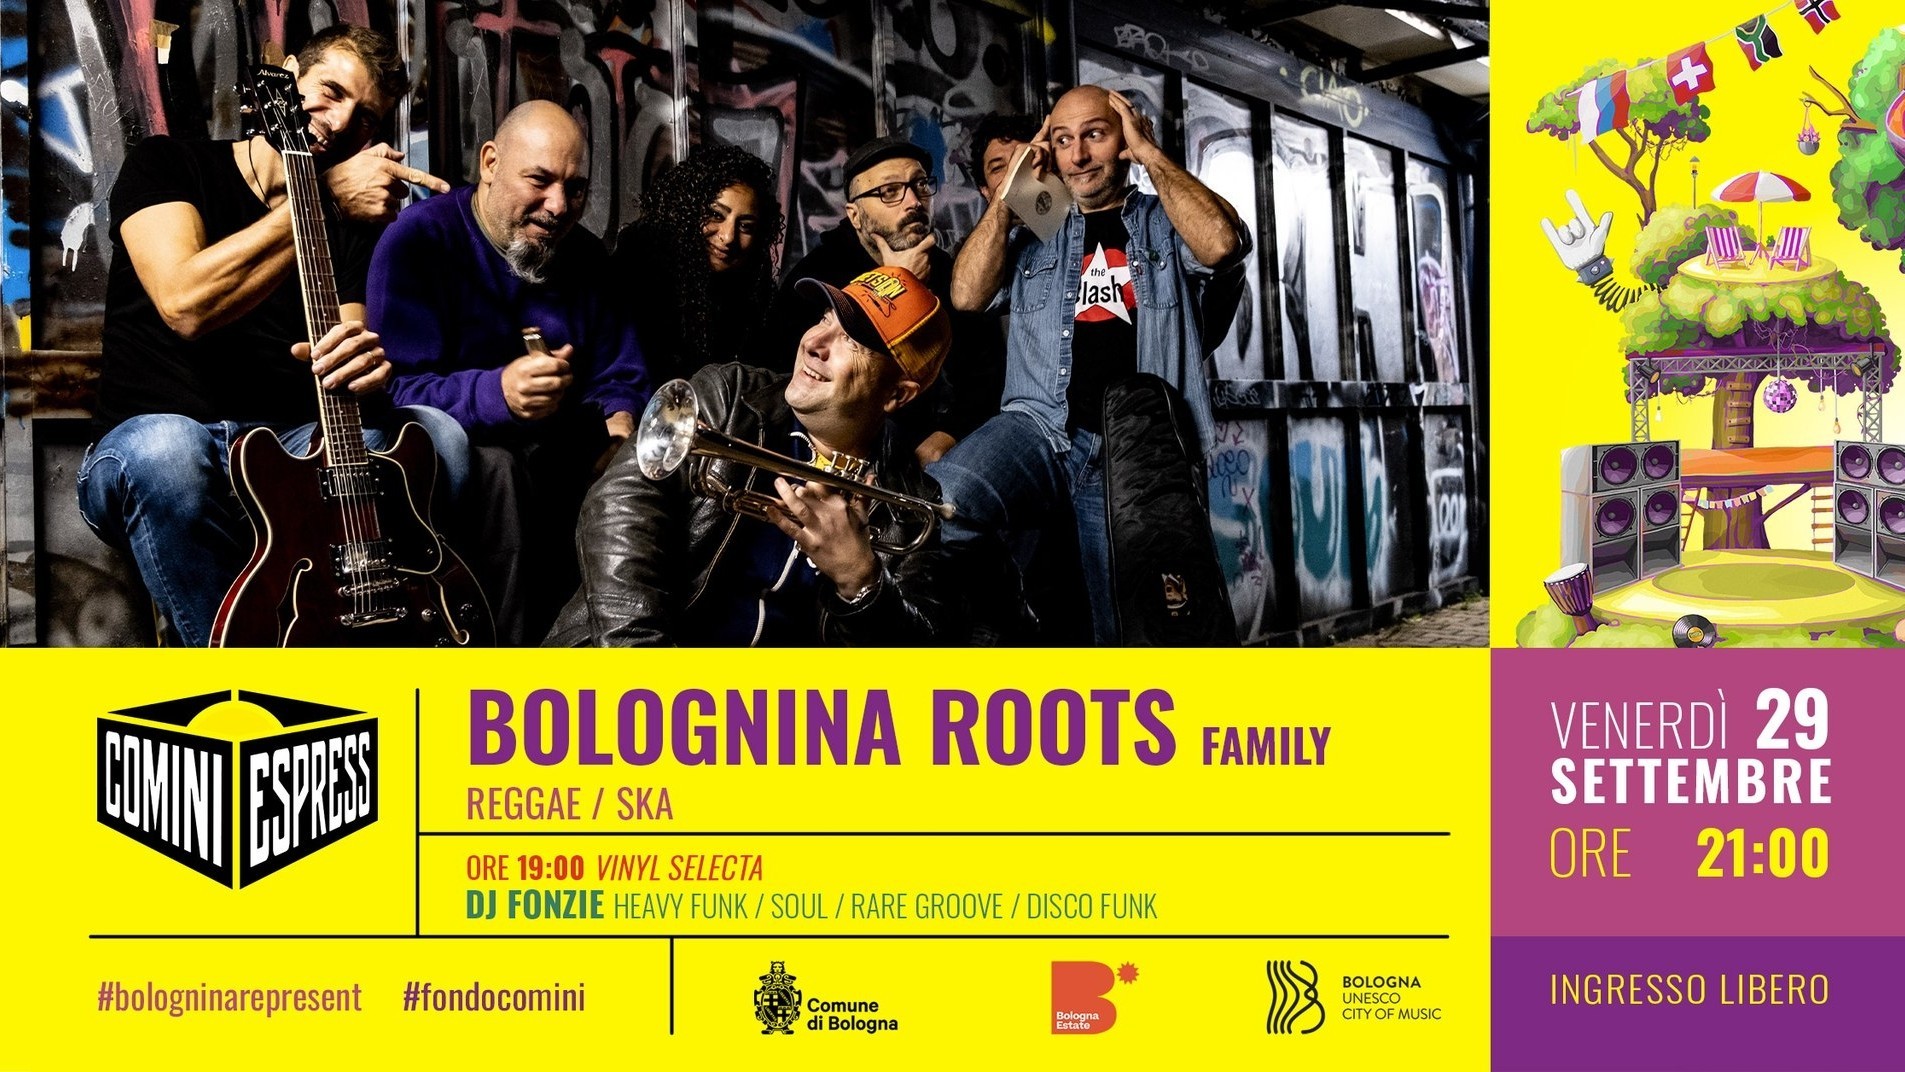 Bolognina Roots Family + Vynil selecta con: Dj Fonzie